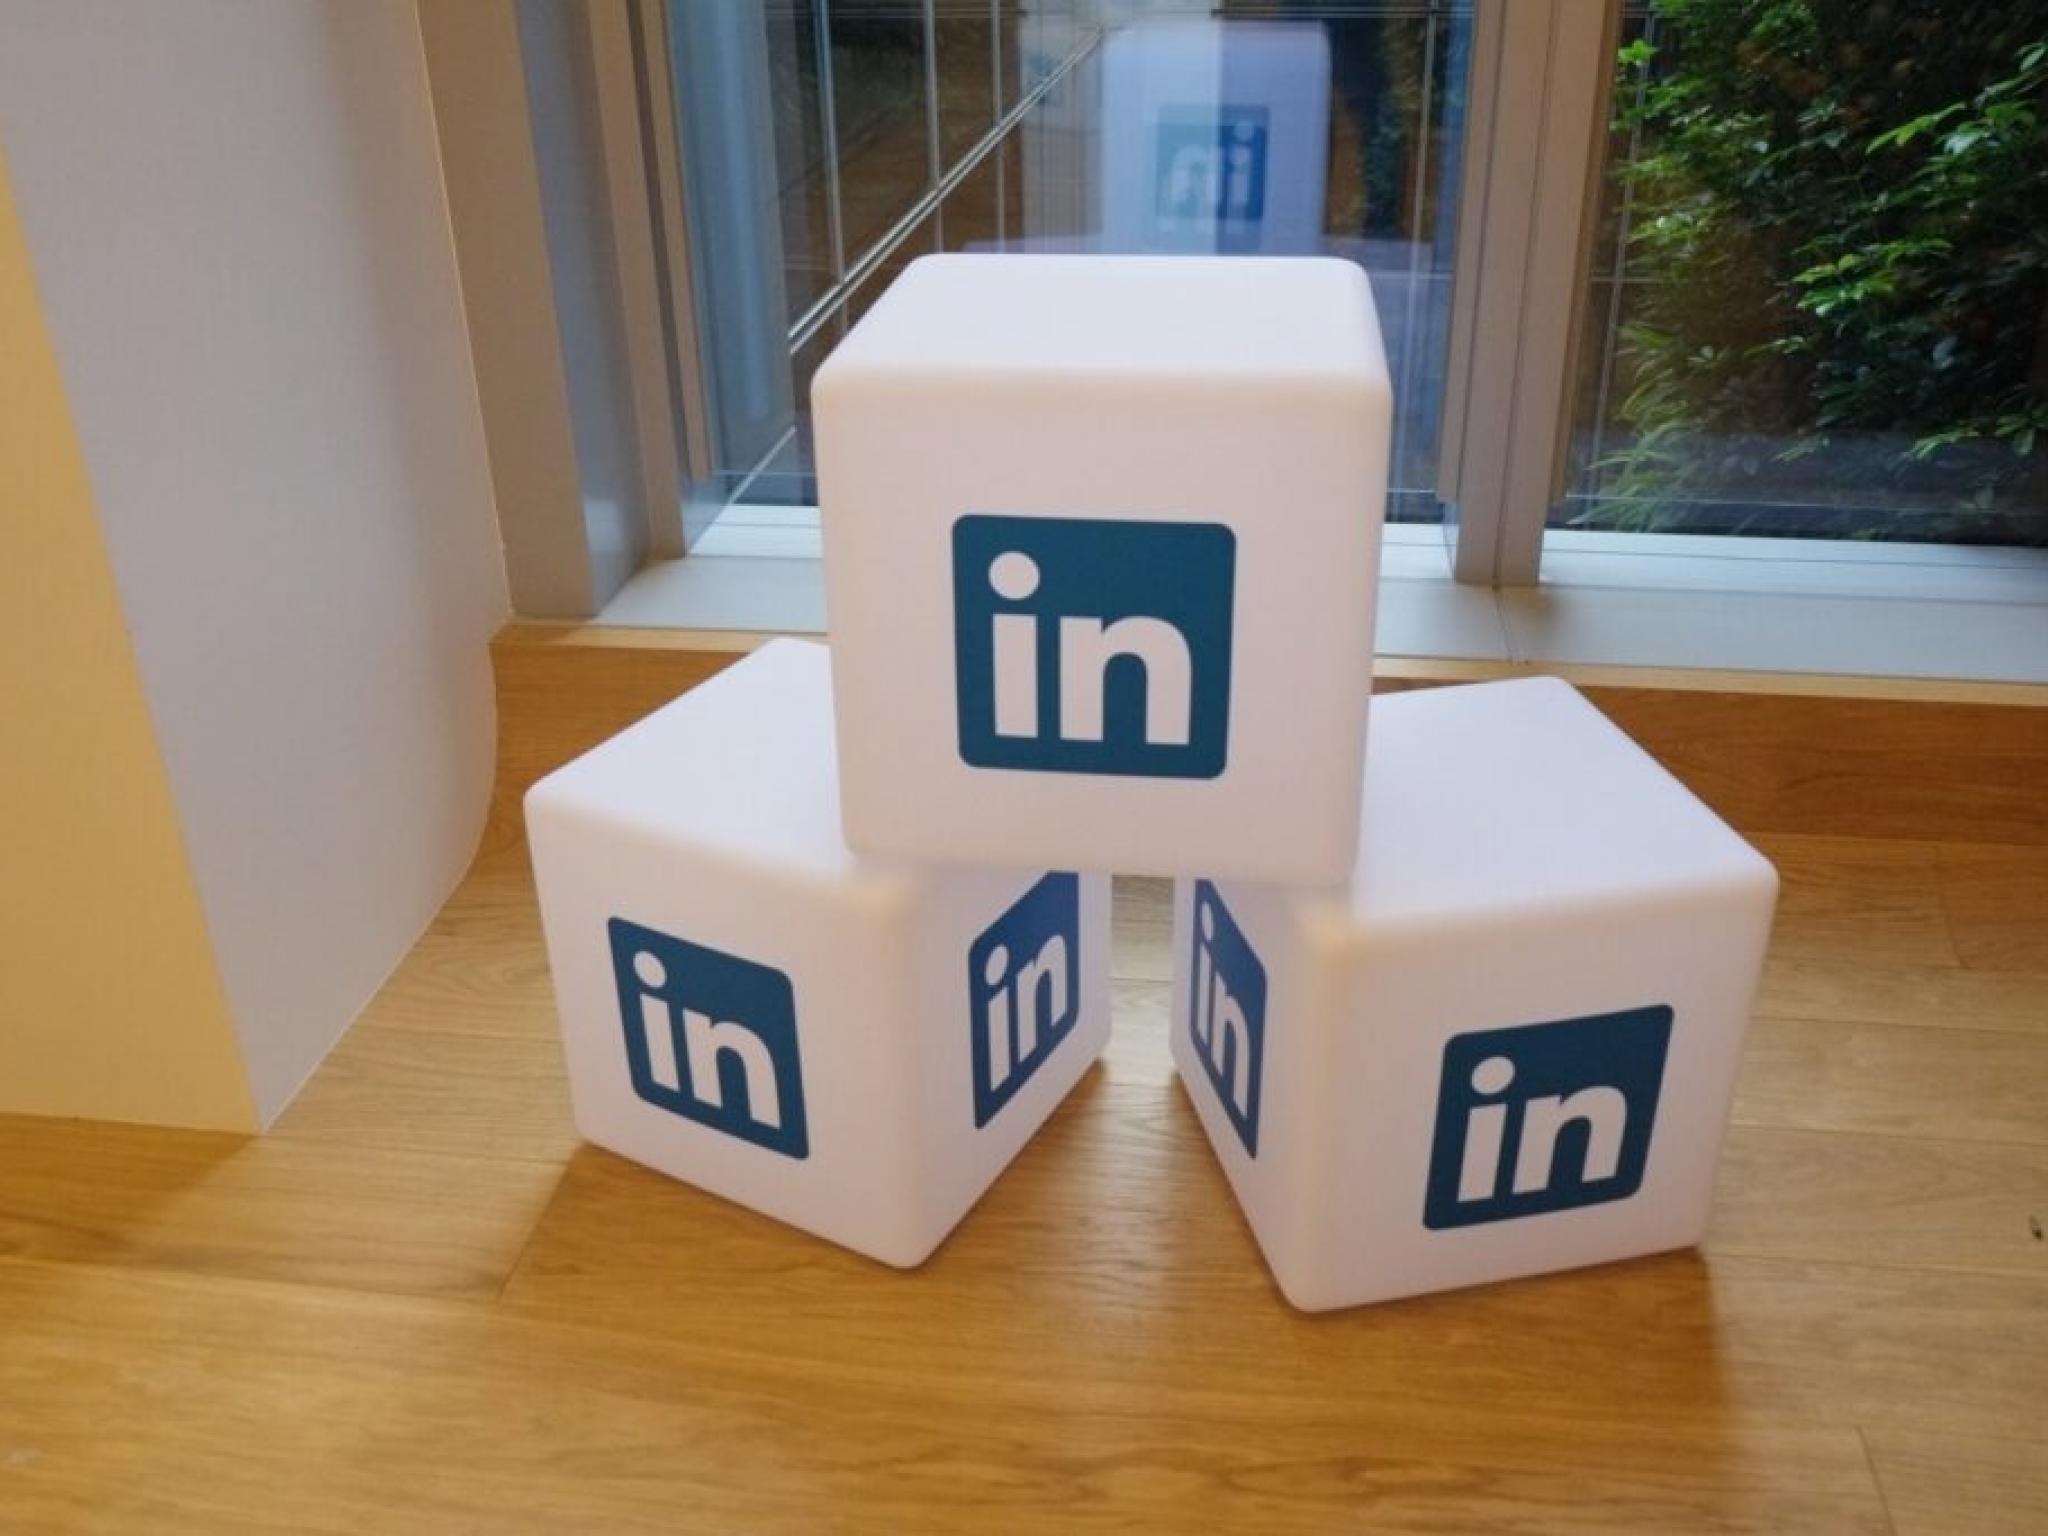  linkedin-enters-short-form-video-battle-with-new-tiktok-style-feed-targets-professional-growth-content 